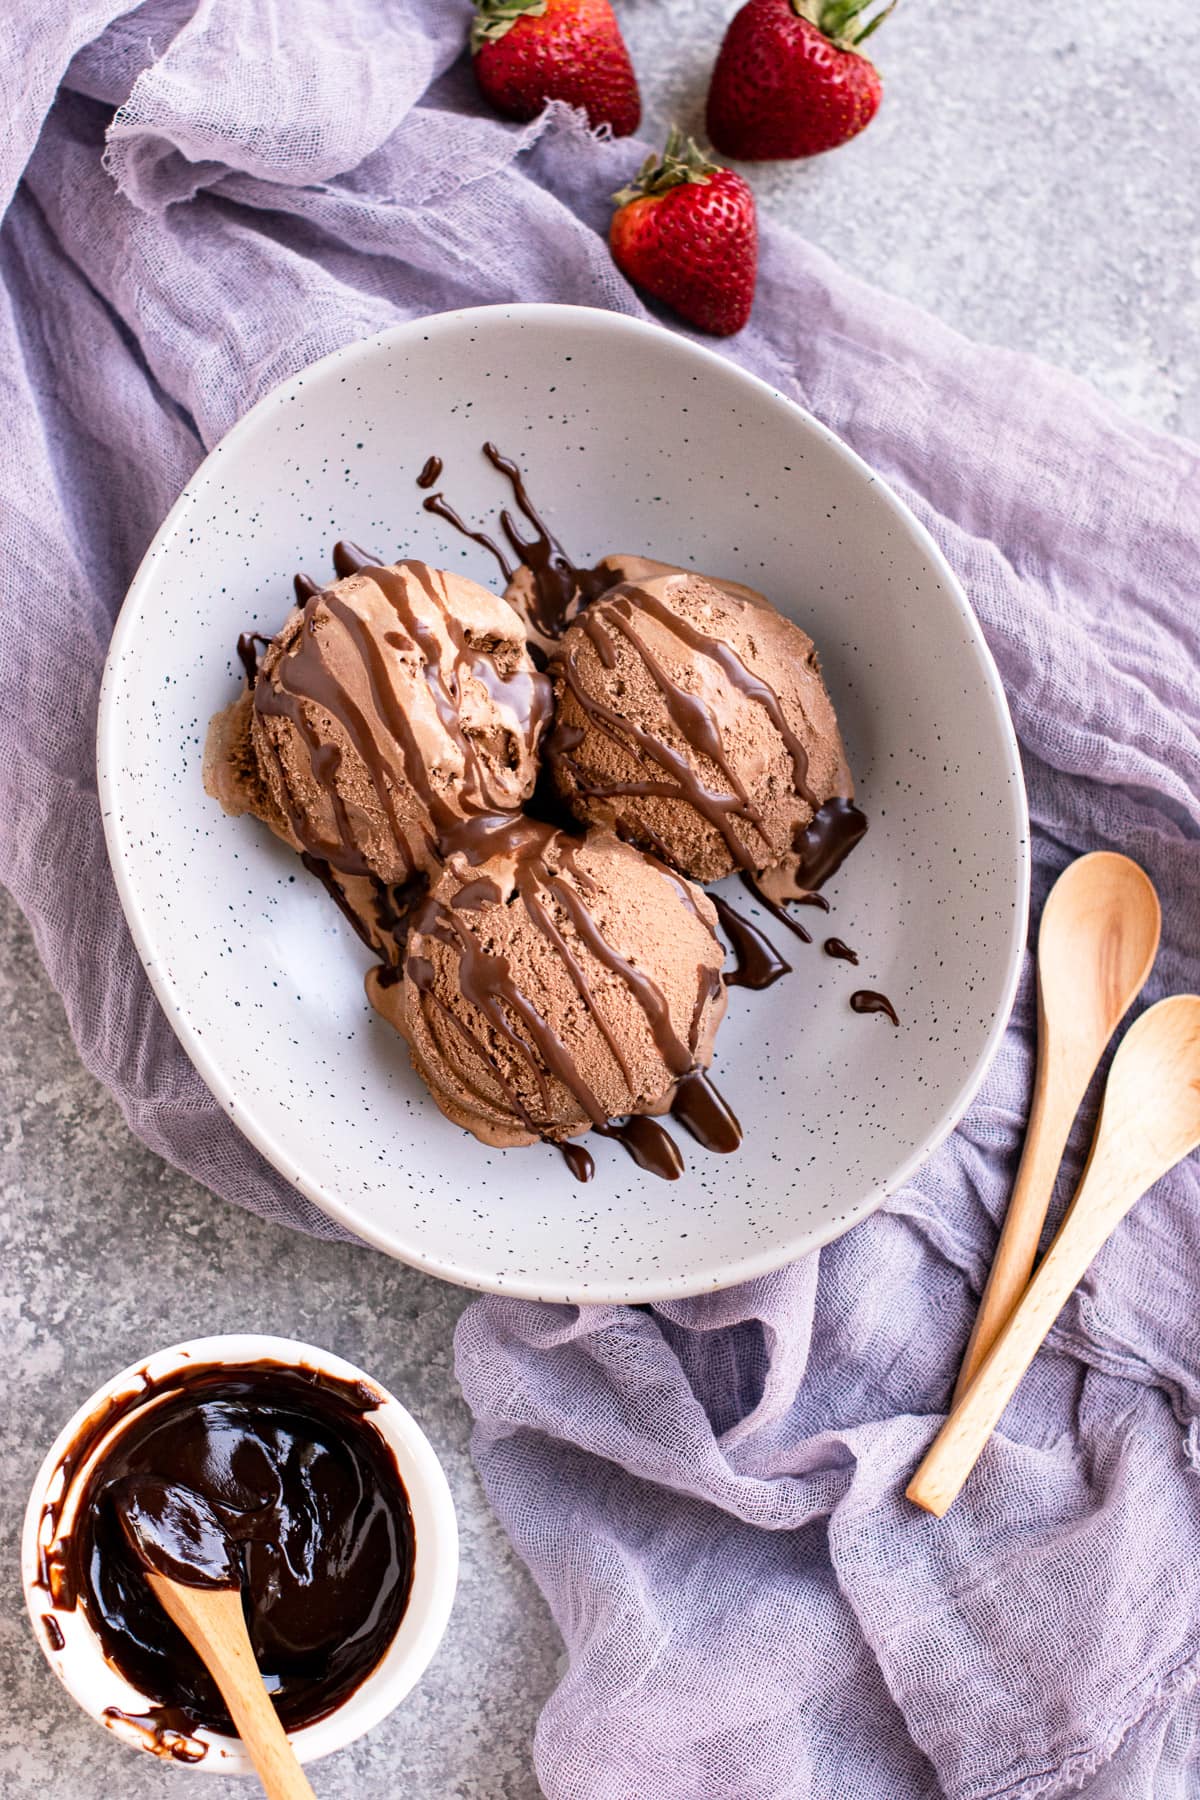 Homemade ice cream scoops in a bowl with chocolate sauce on the side